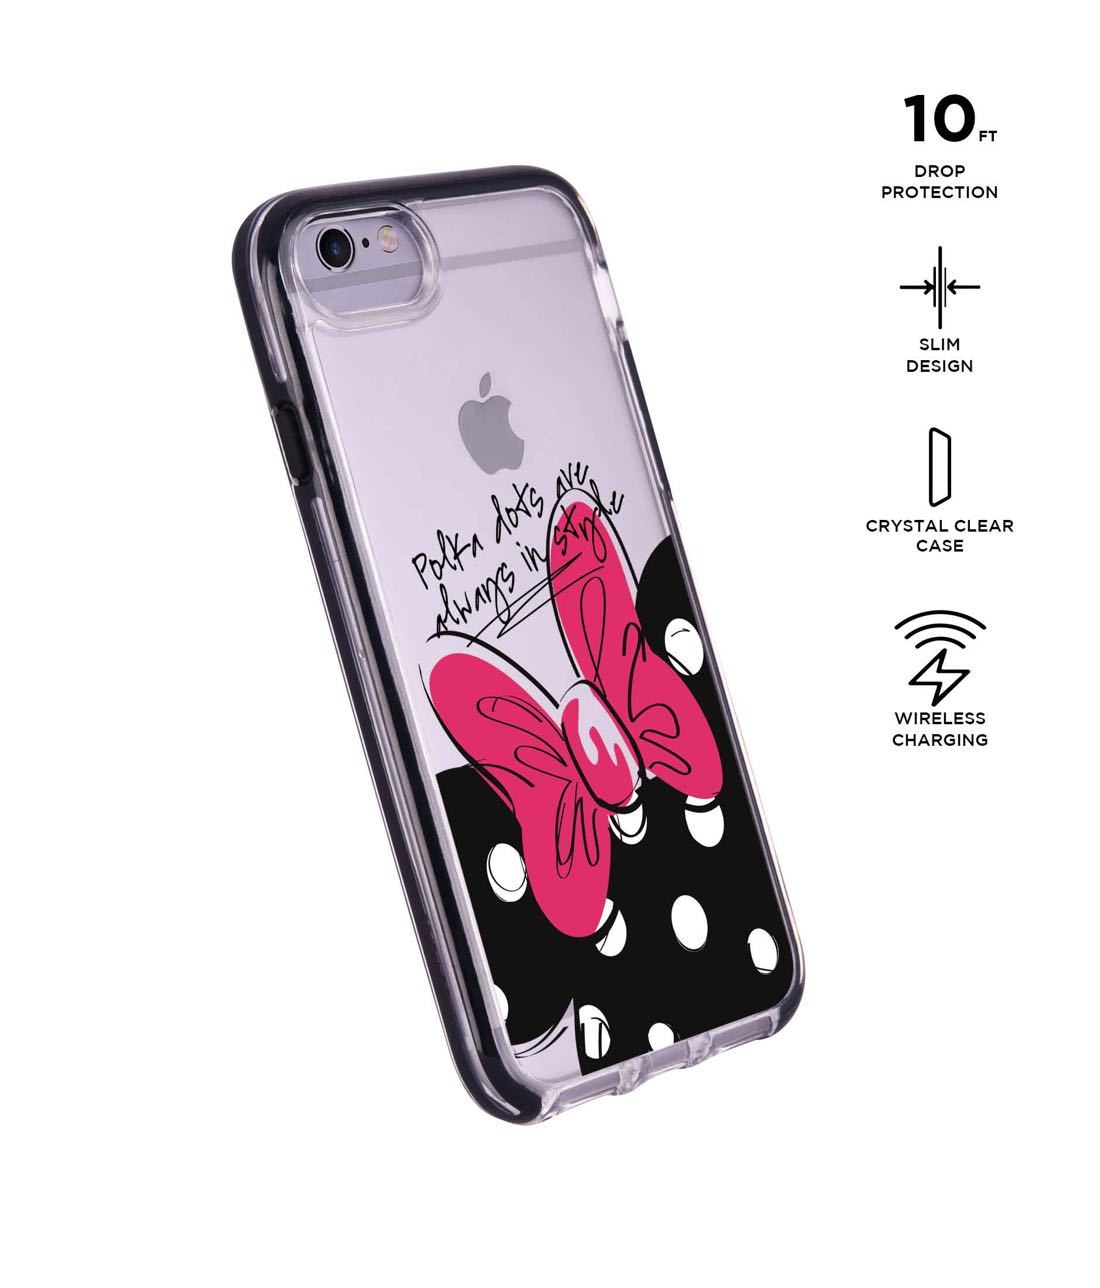 Polka Minnie - Extreme Phone Case for iPhone 6 Plus